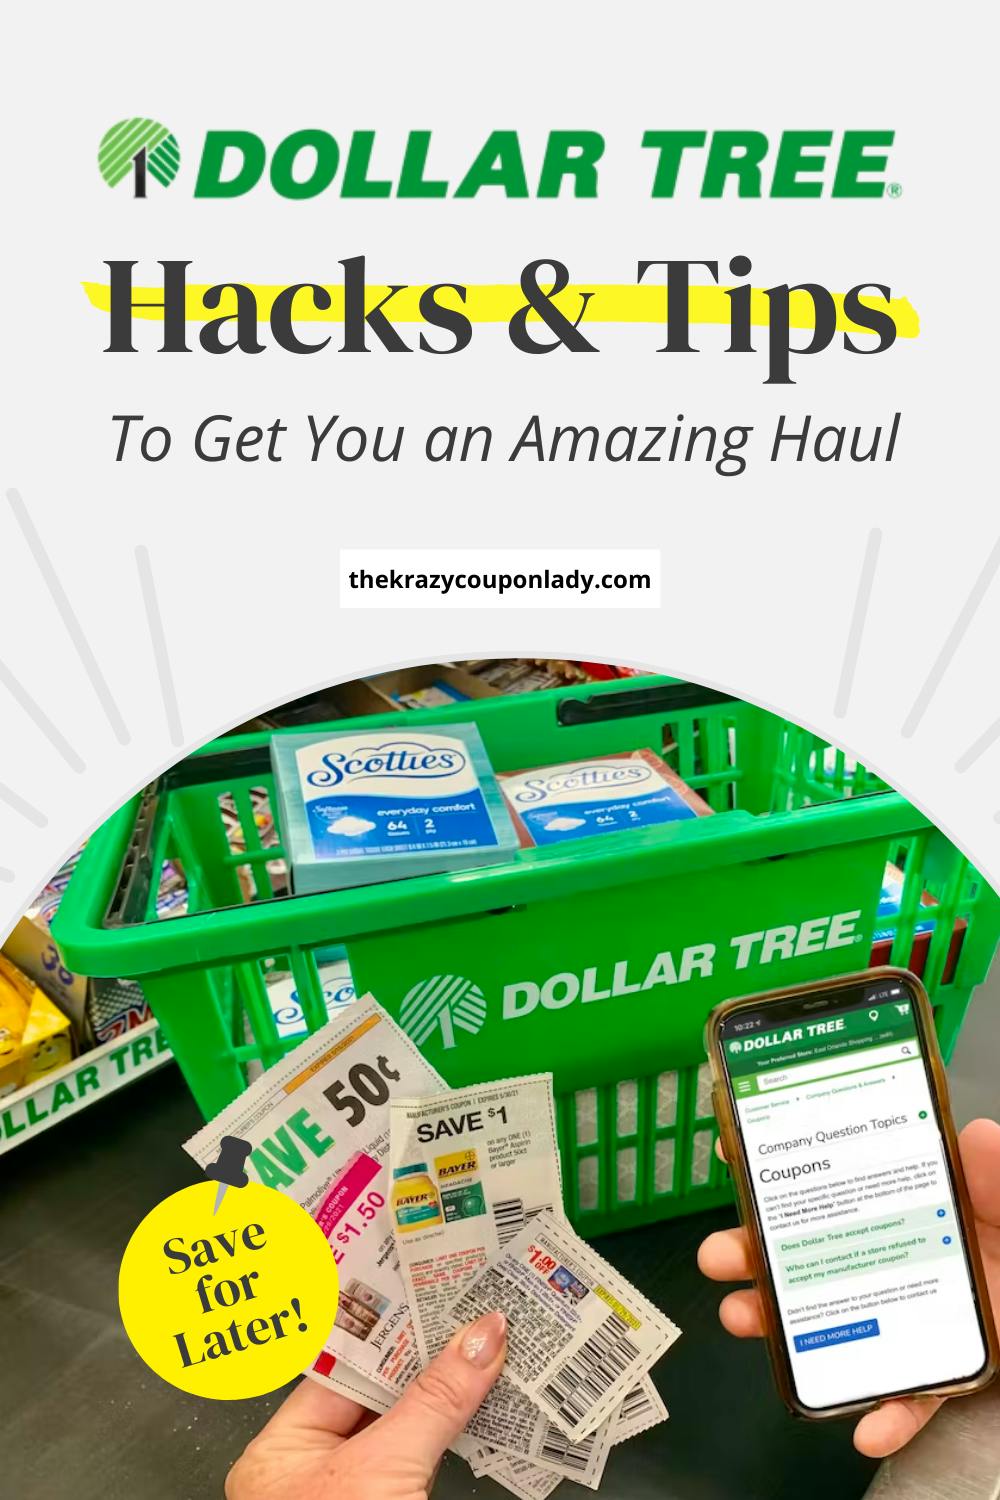 16 Tips to Get You an Amazing Dollar Tree Haul